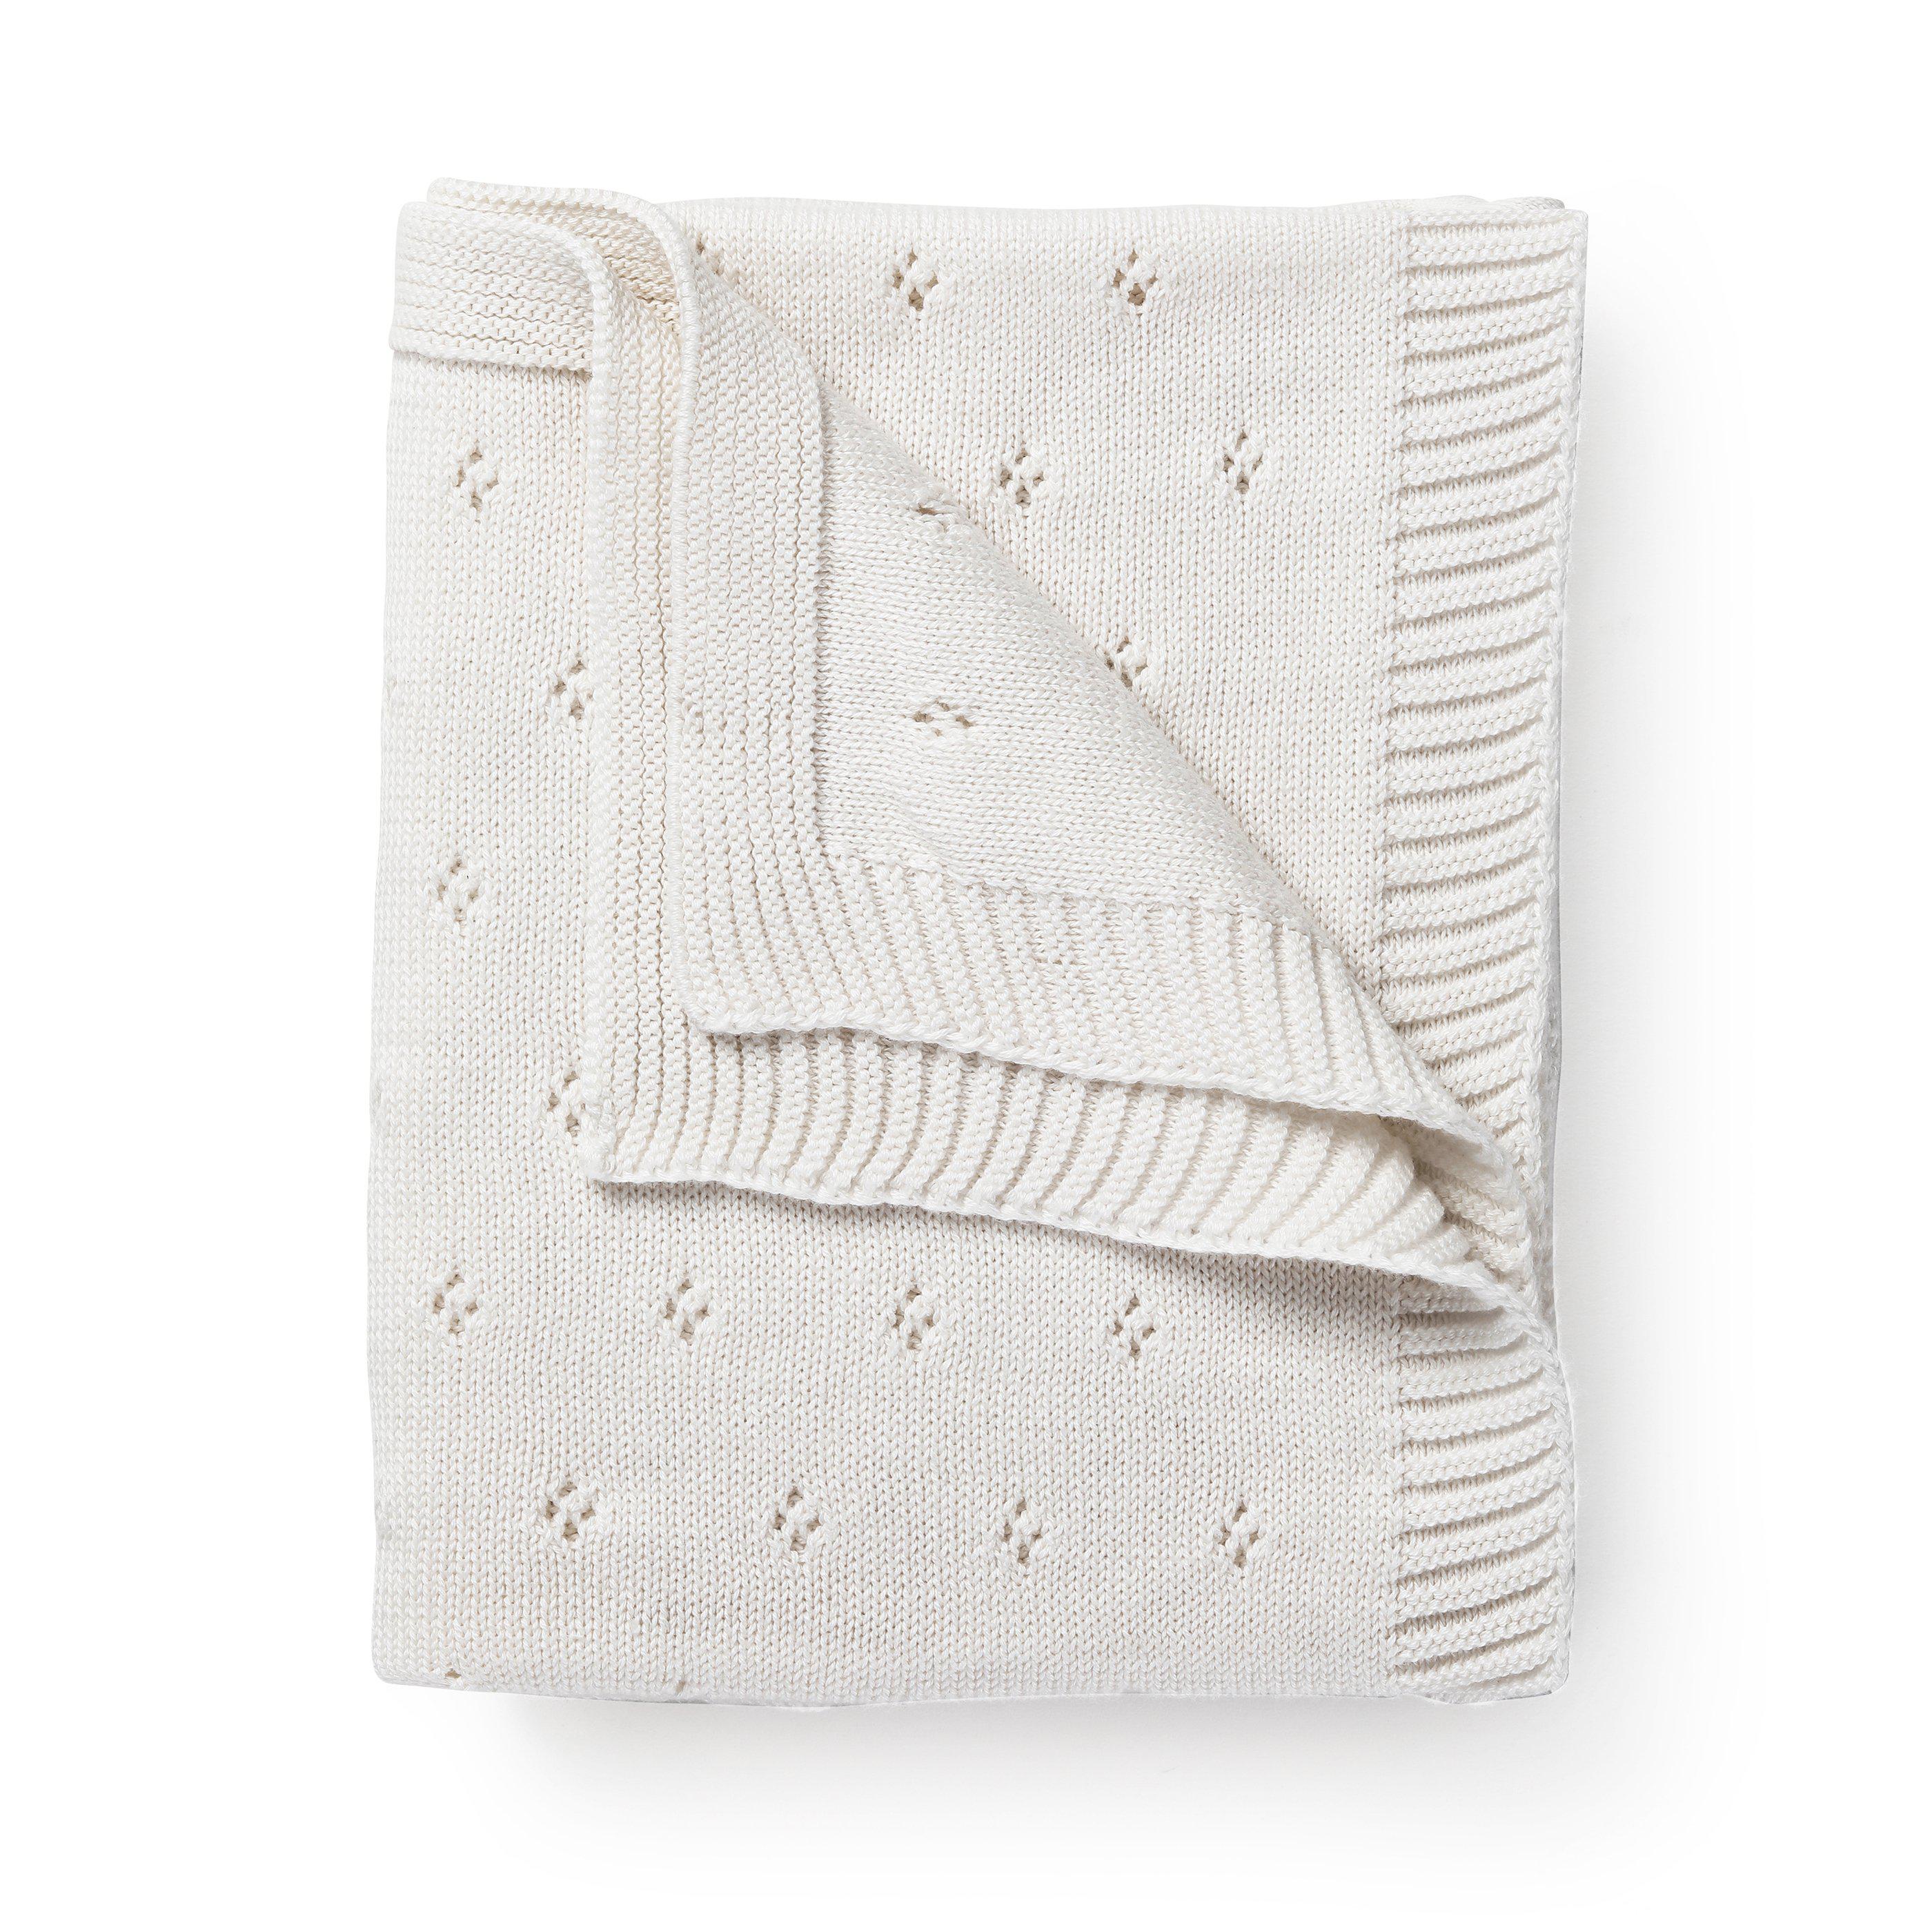 A neatly folded Organic Cotton Pointelle Baby Blanket in Ella Ivory, by Makemake Organics, with a decorative pattern of small flowers, displayed on a white background.